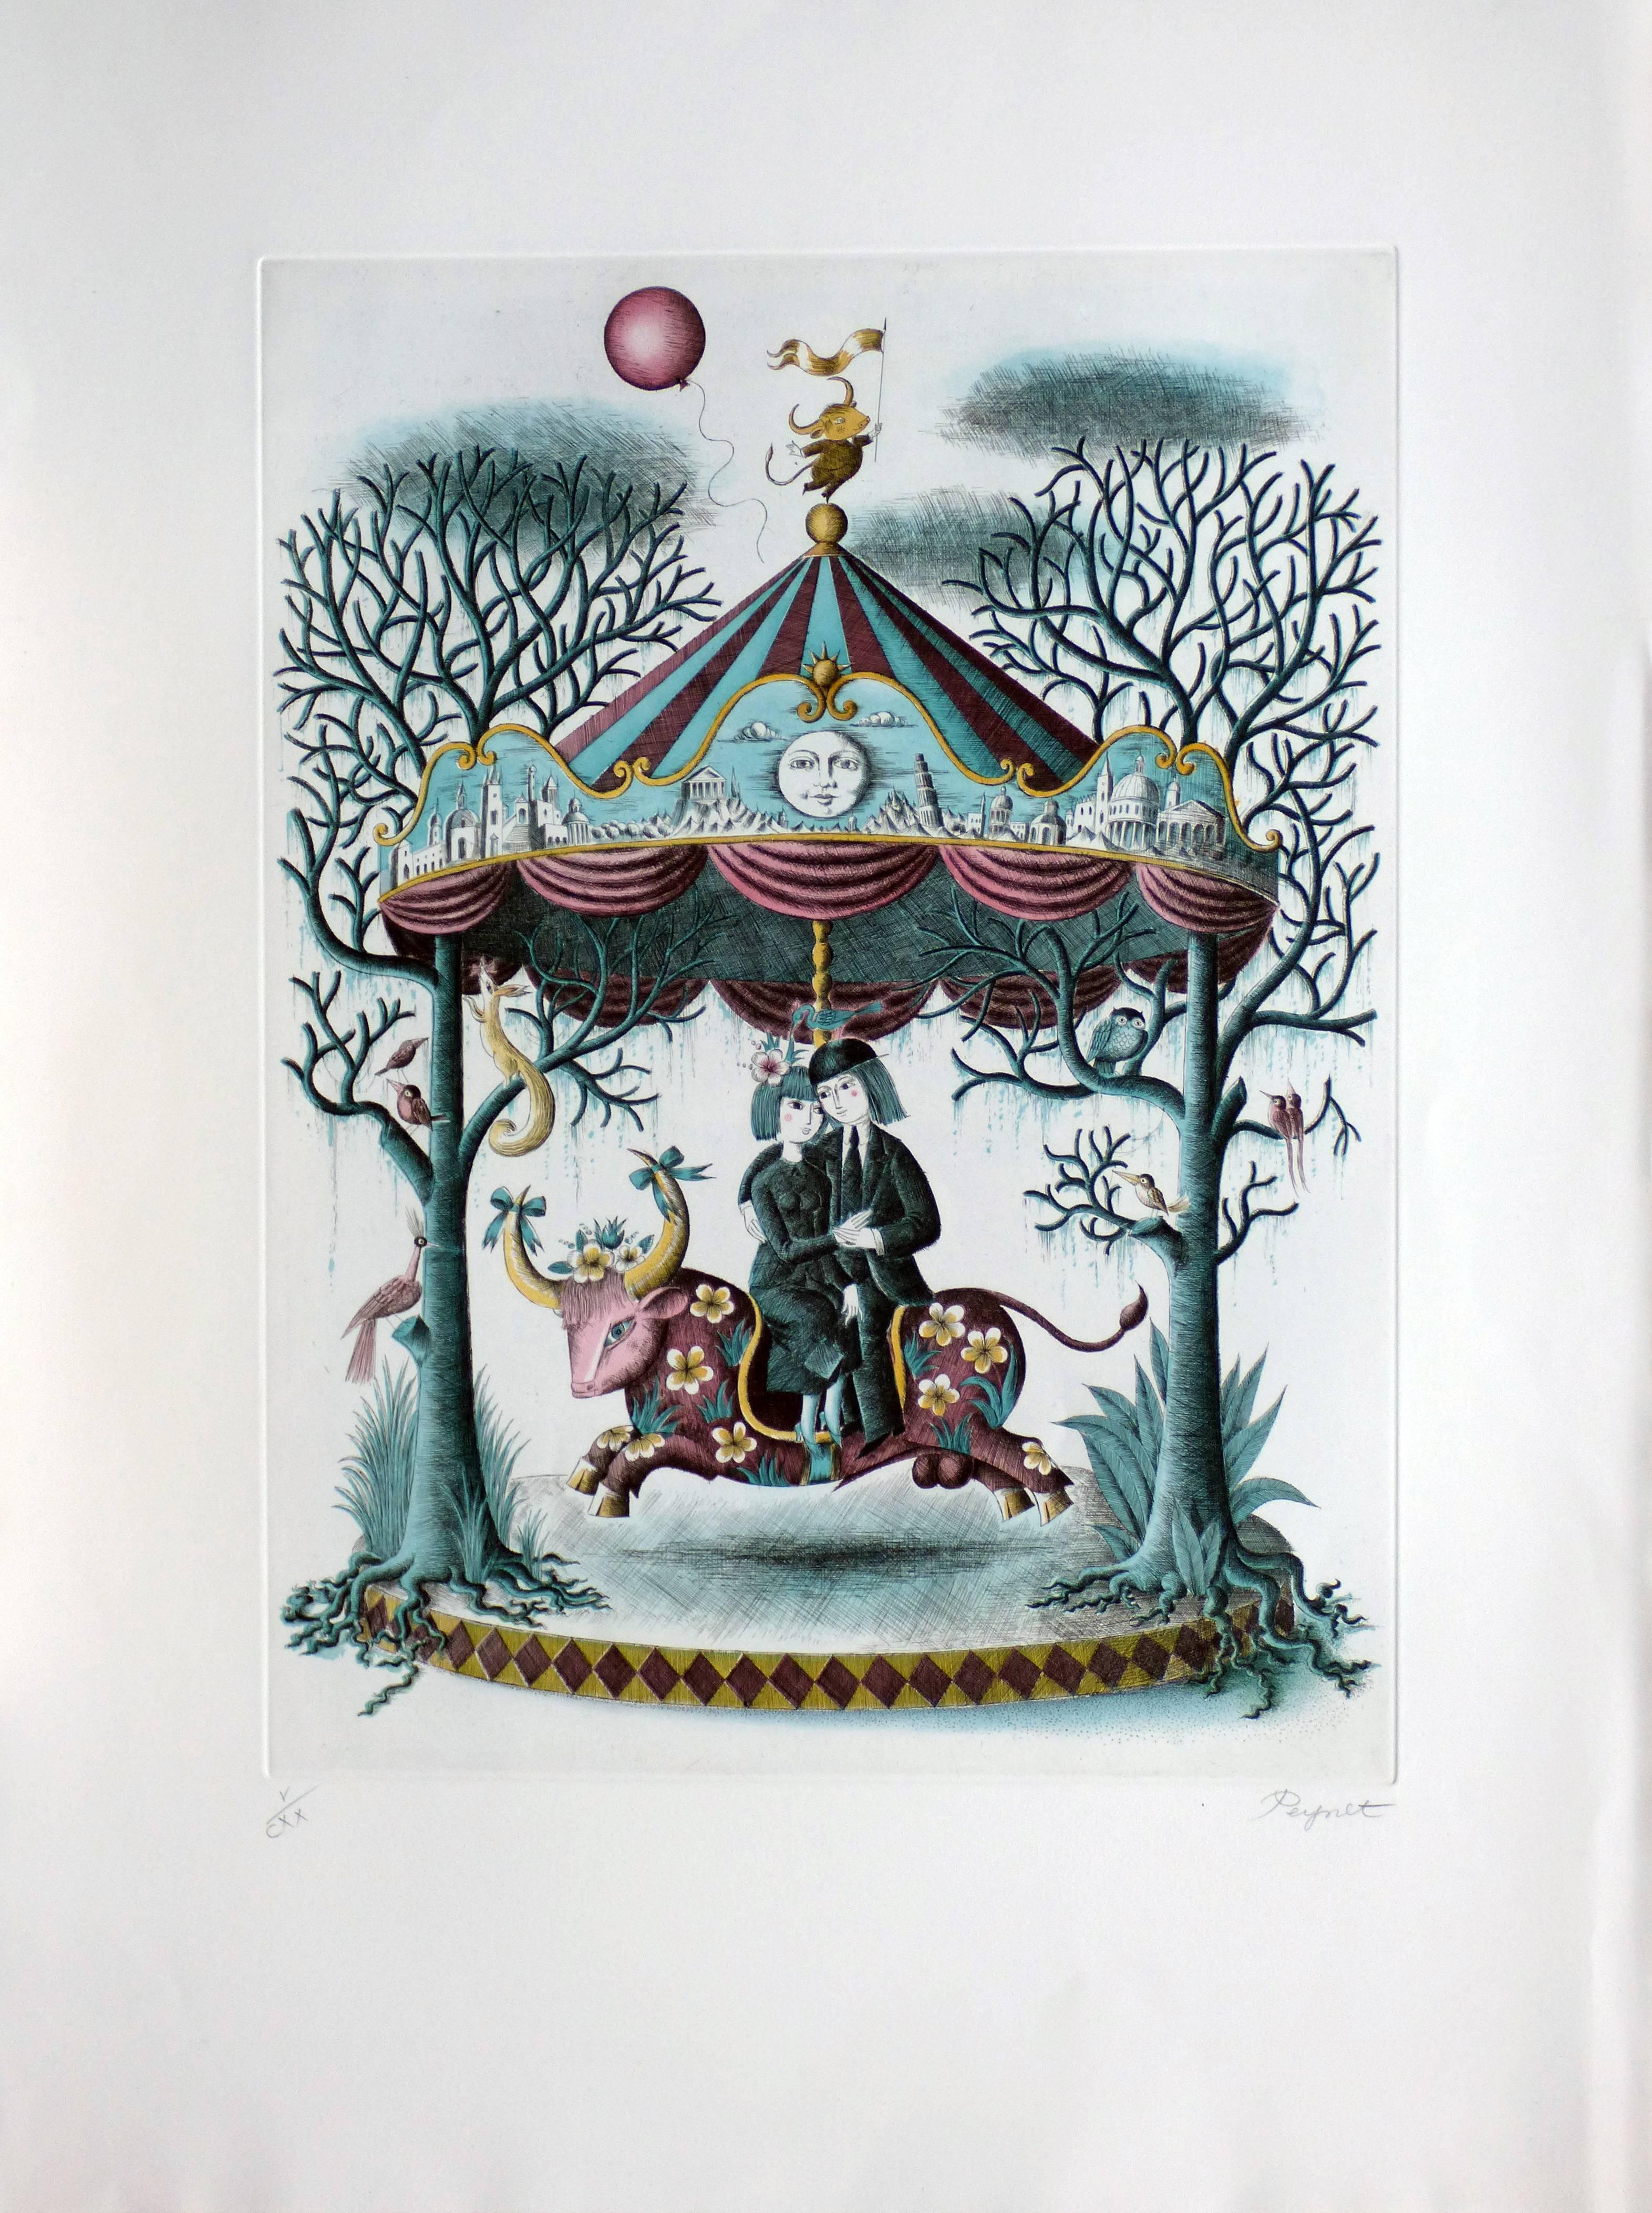 The lovers, the bull and the carousel - Print by Raymond Peynet